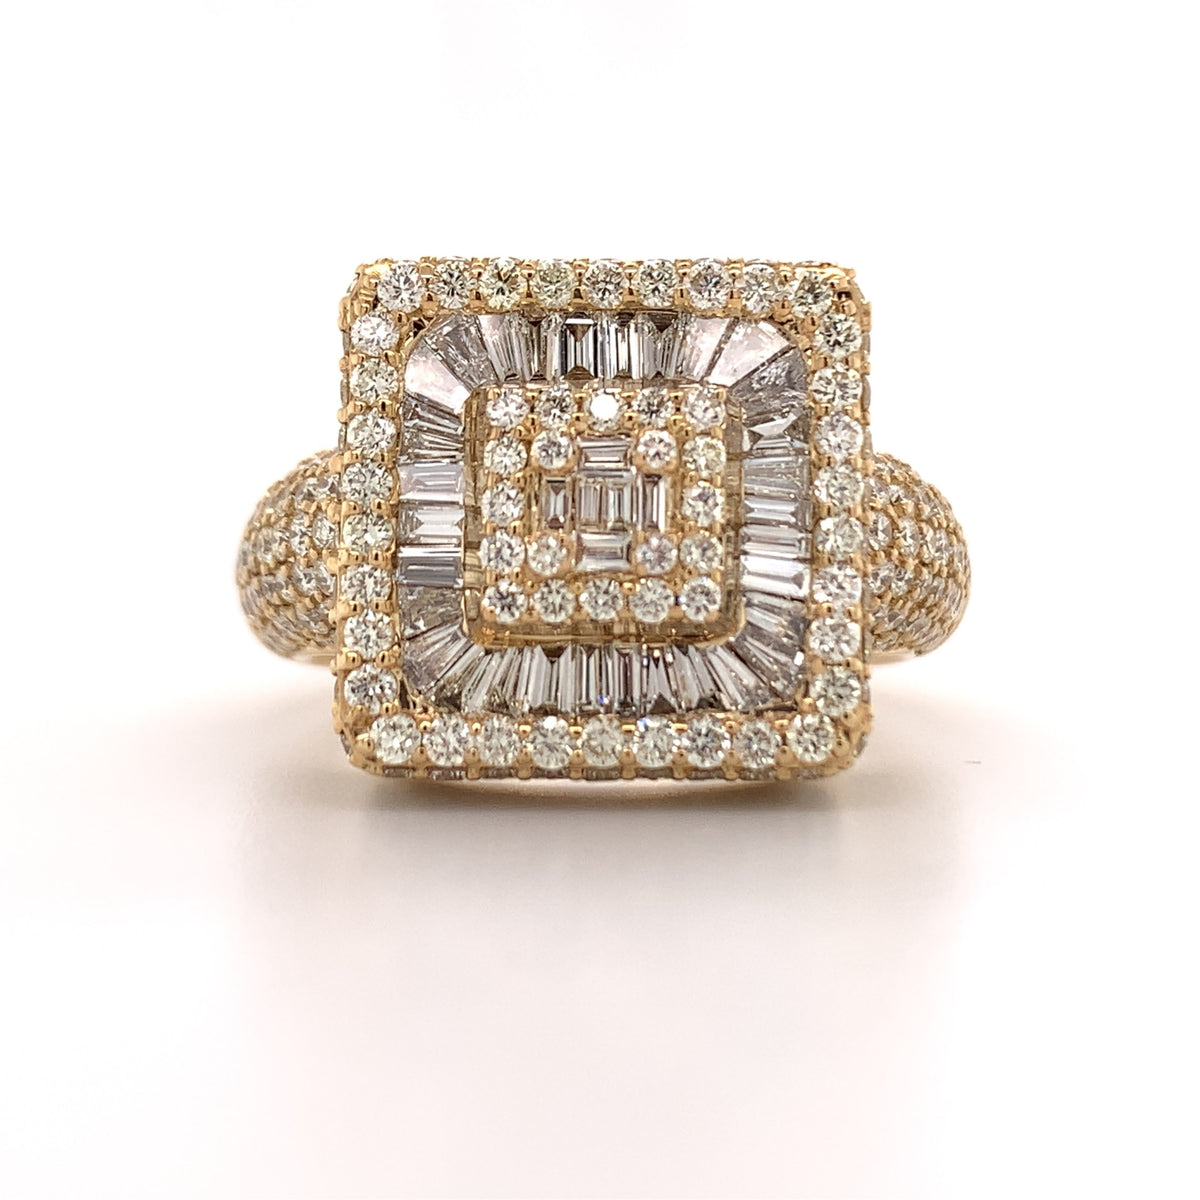 4.00 CT. Diamond Baguette Ring in Gold - White Carat - USA & Canada